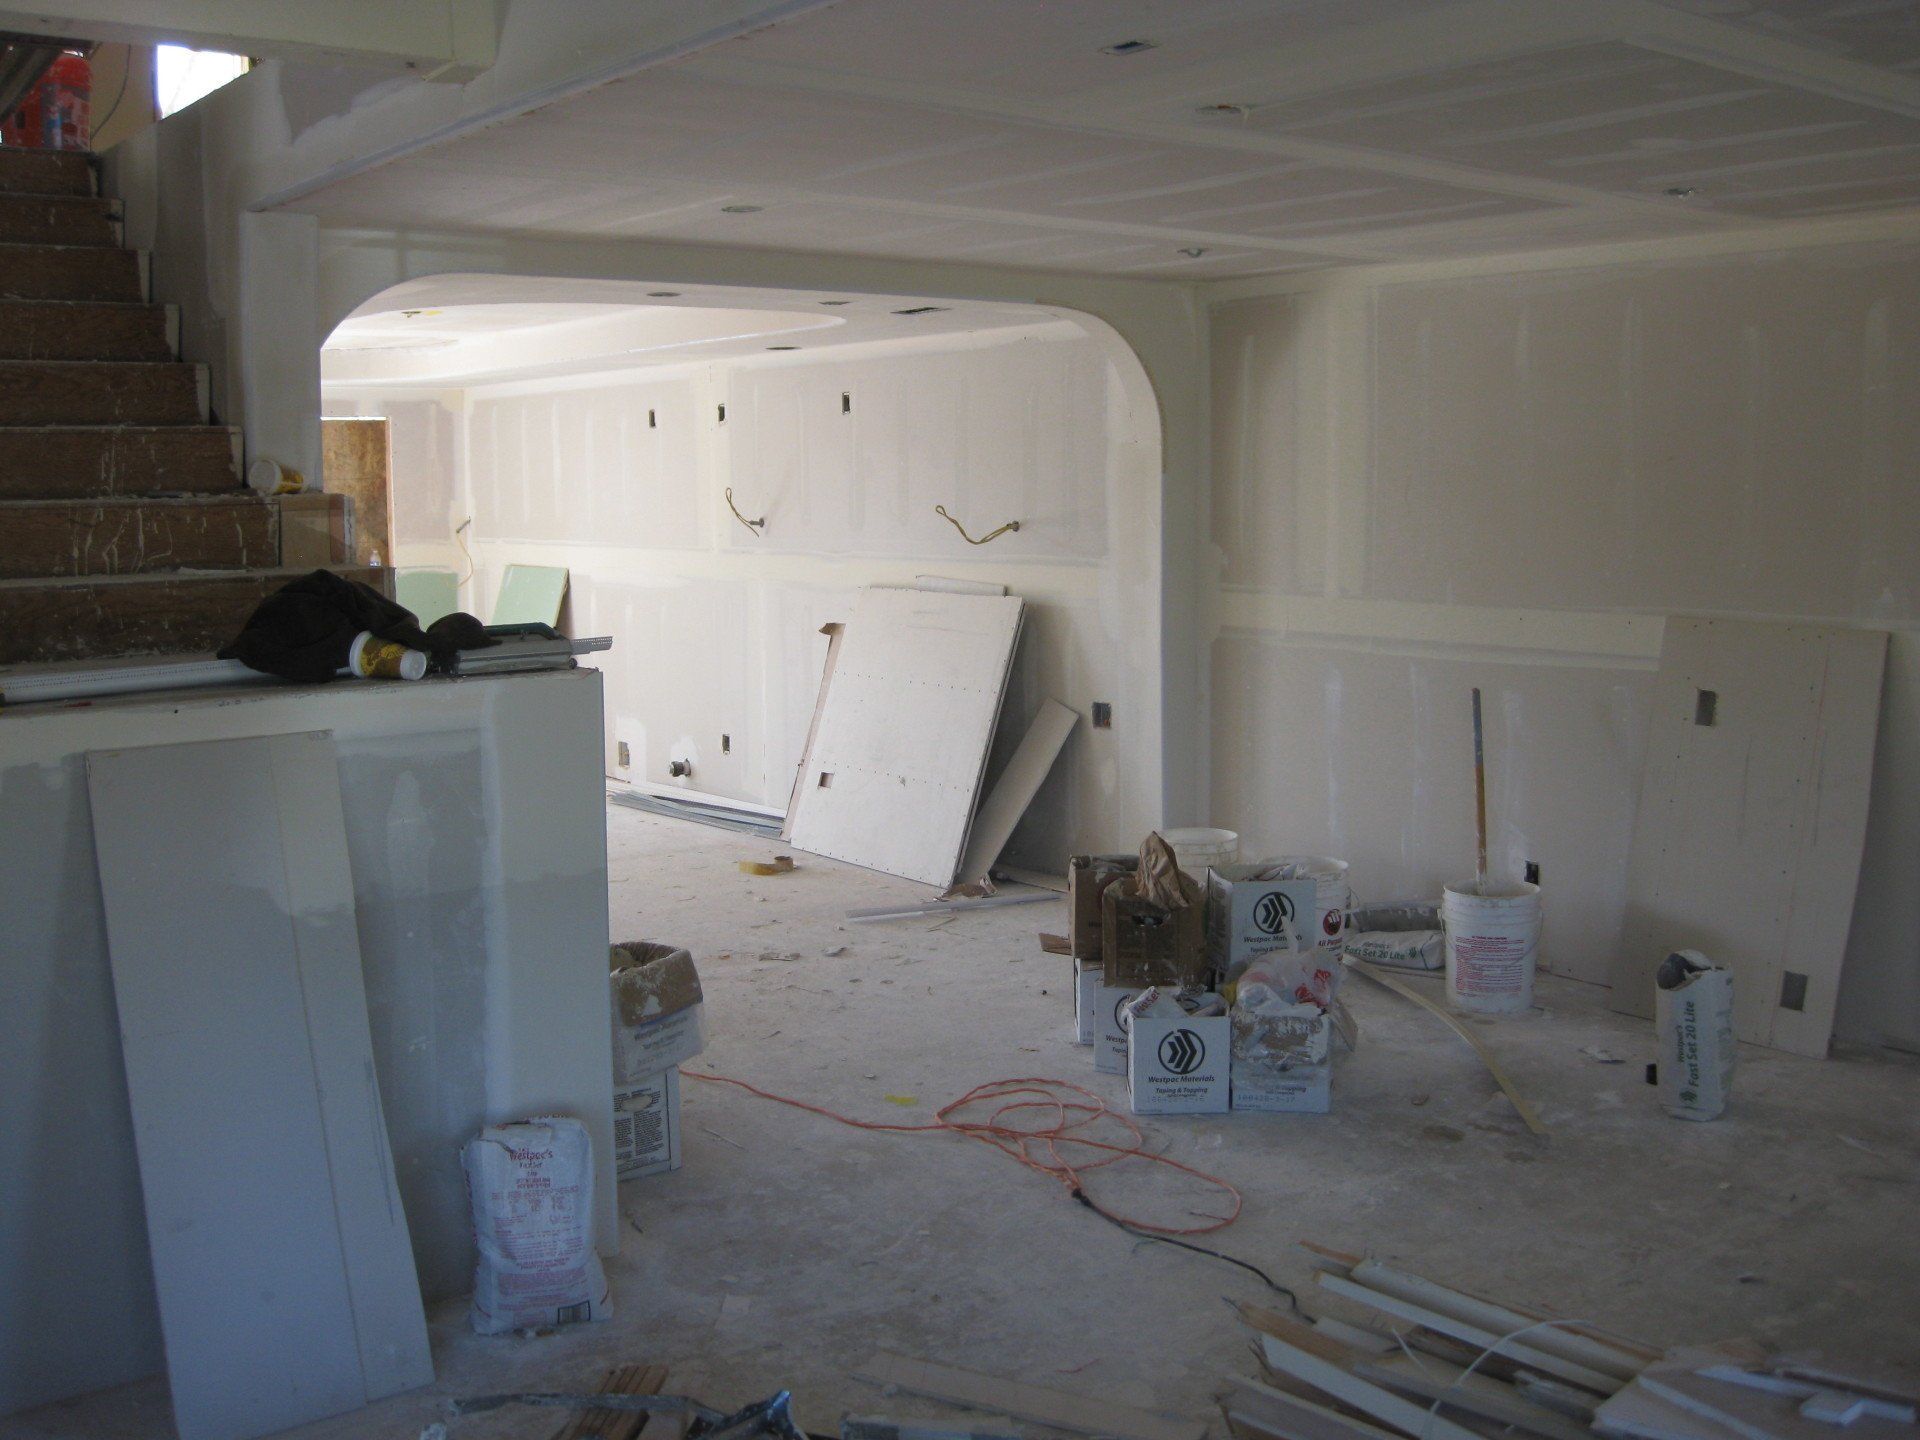 Partition Wall Under Renovation - Construction and Remodeling Services in in Orange, CA